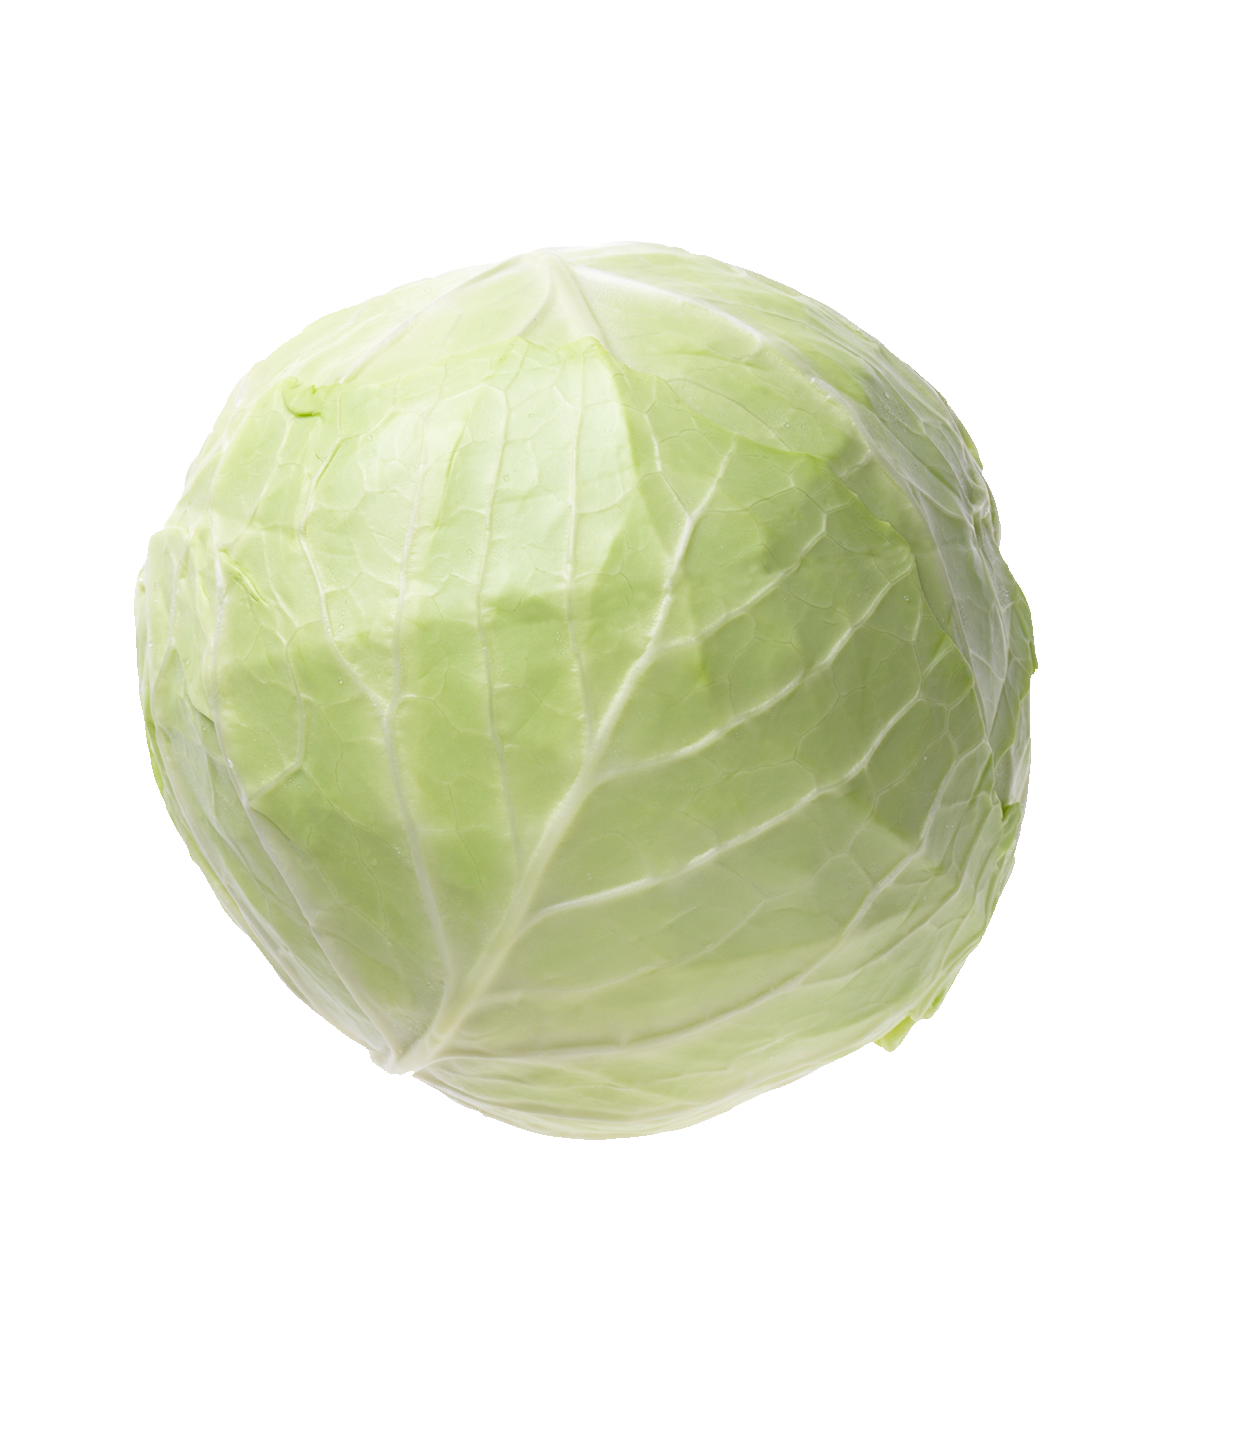 photo of green cabbage